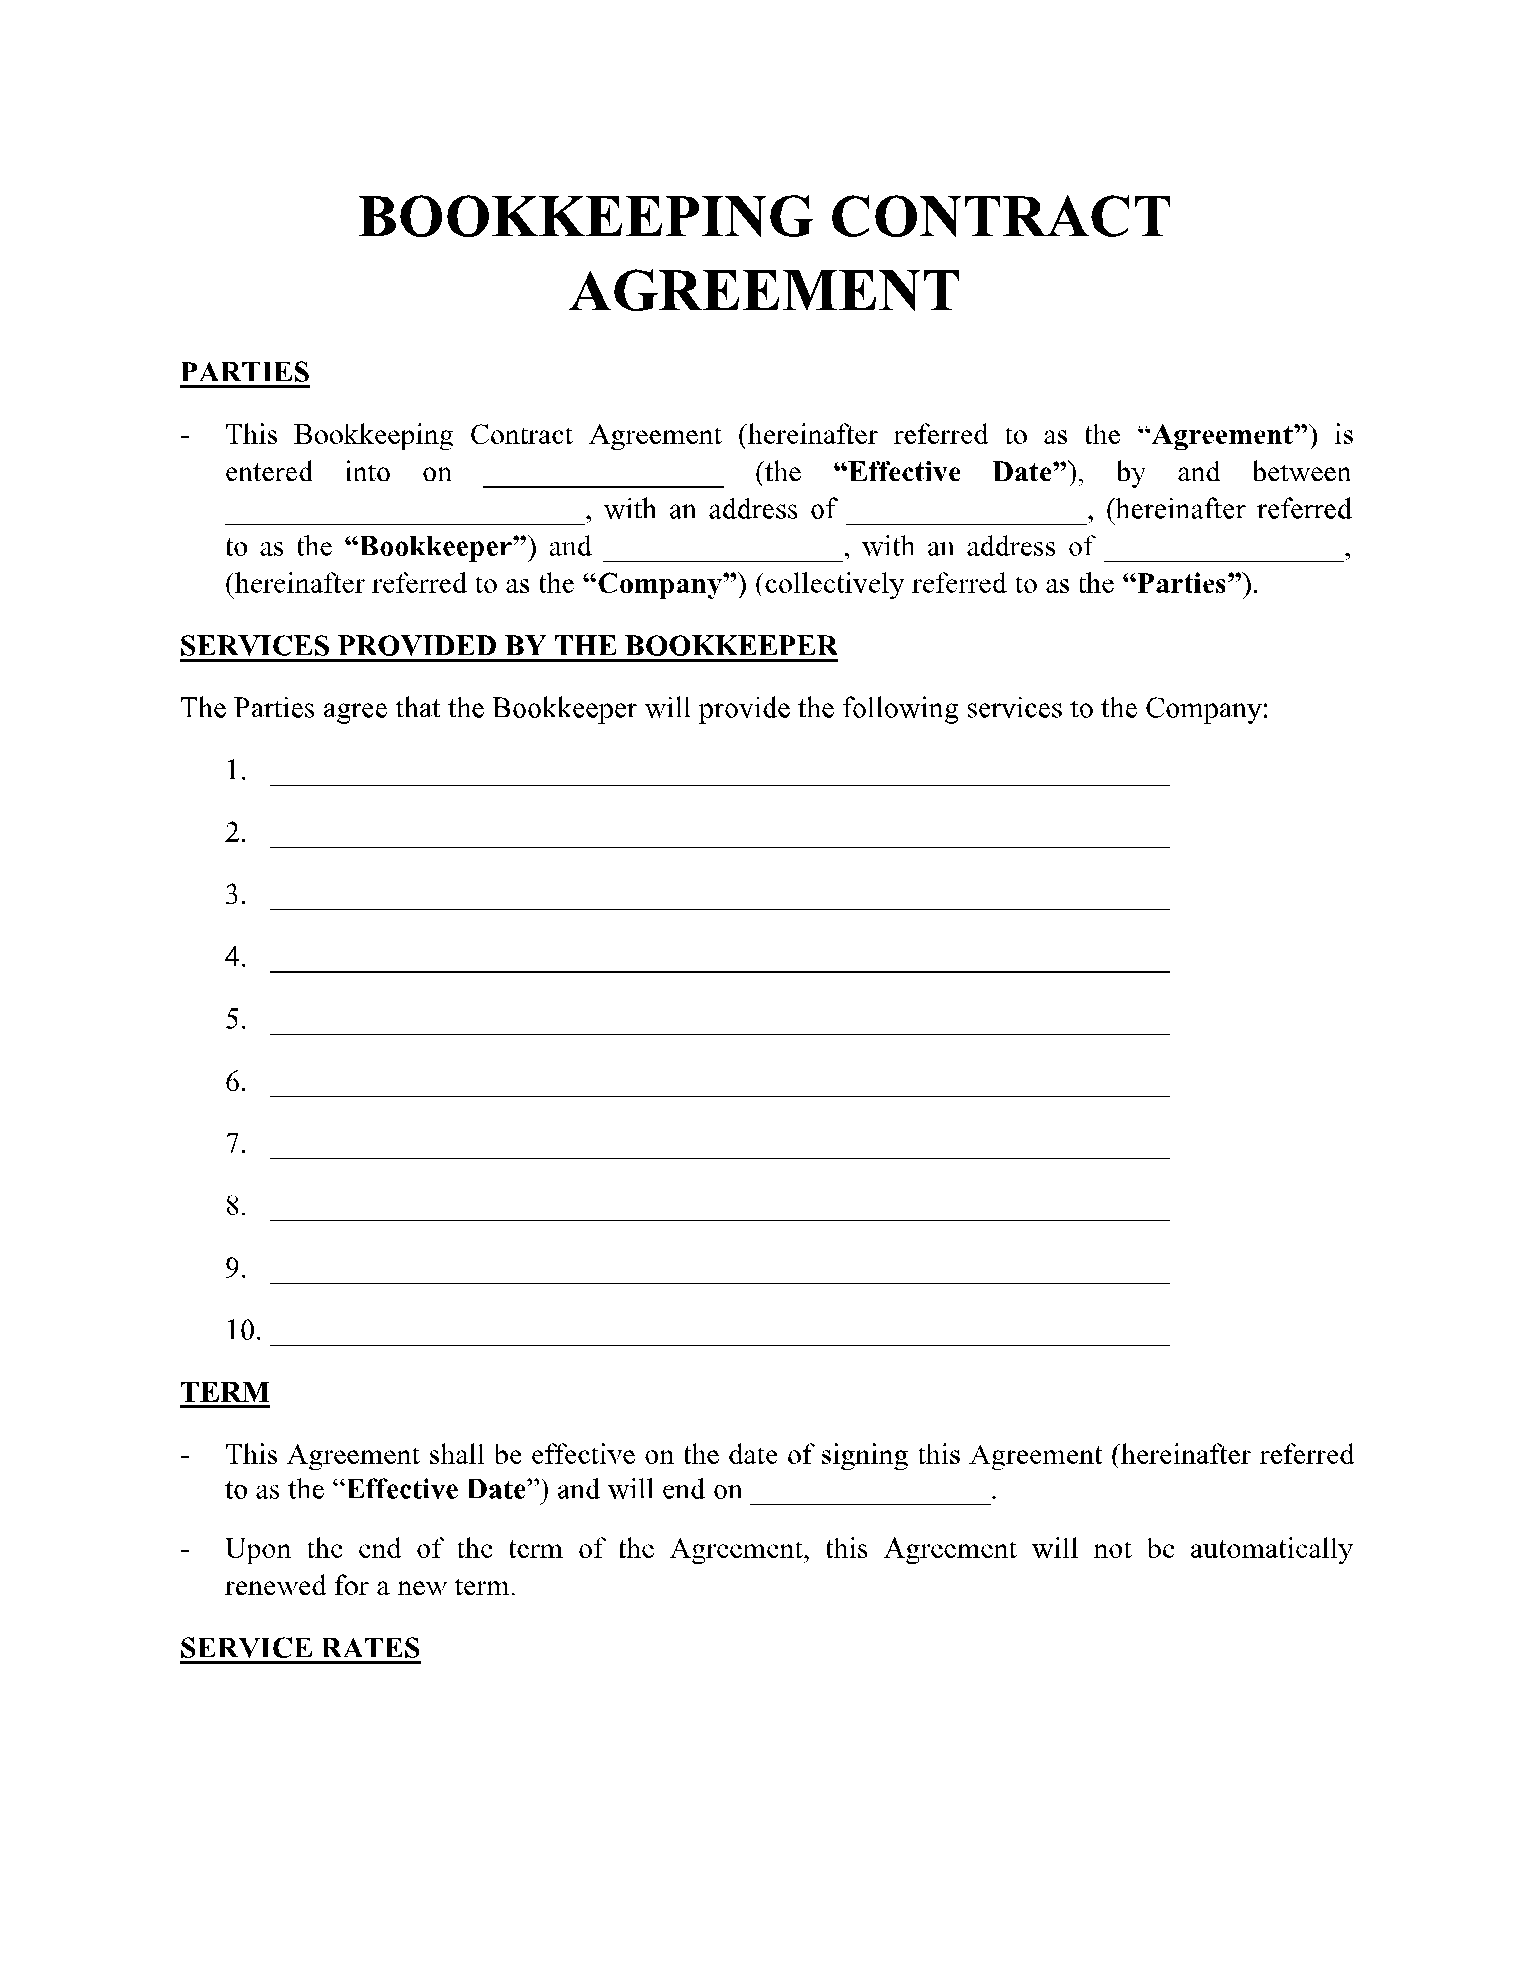 Bookkeeping Contract 1